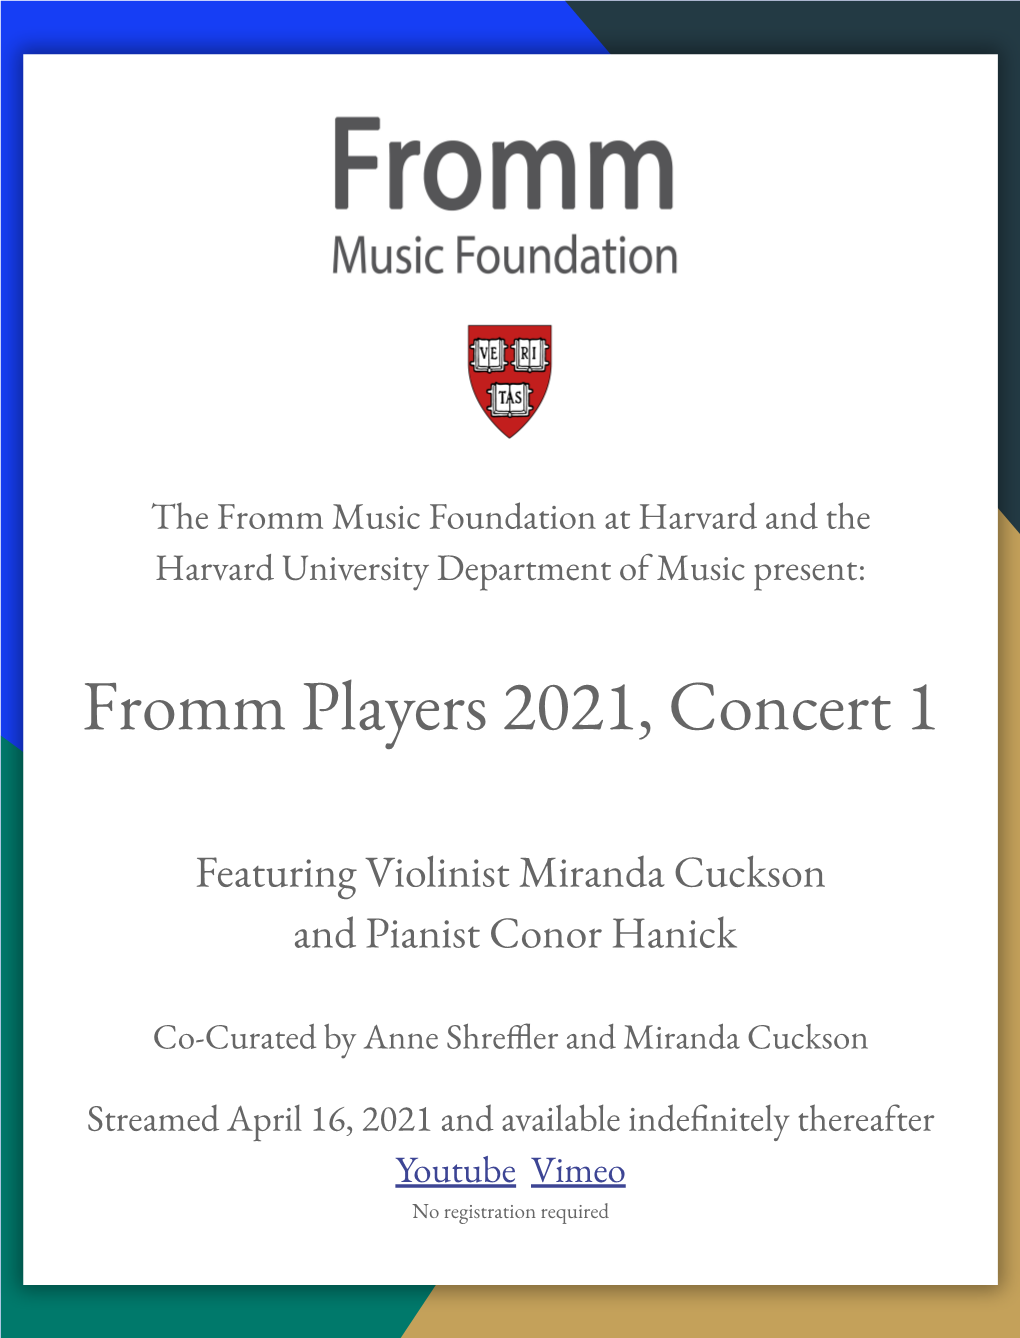 Fromm Players 2021, Concert 1